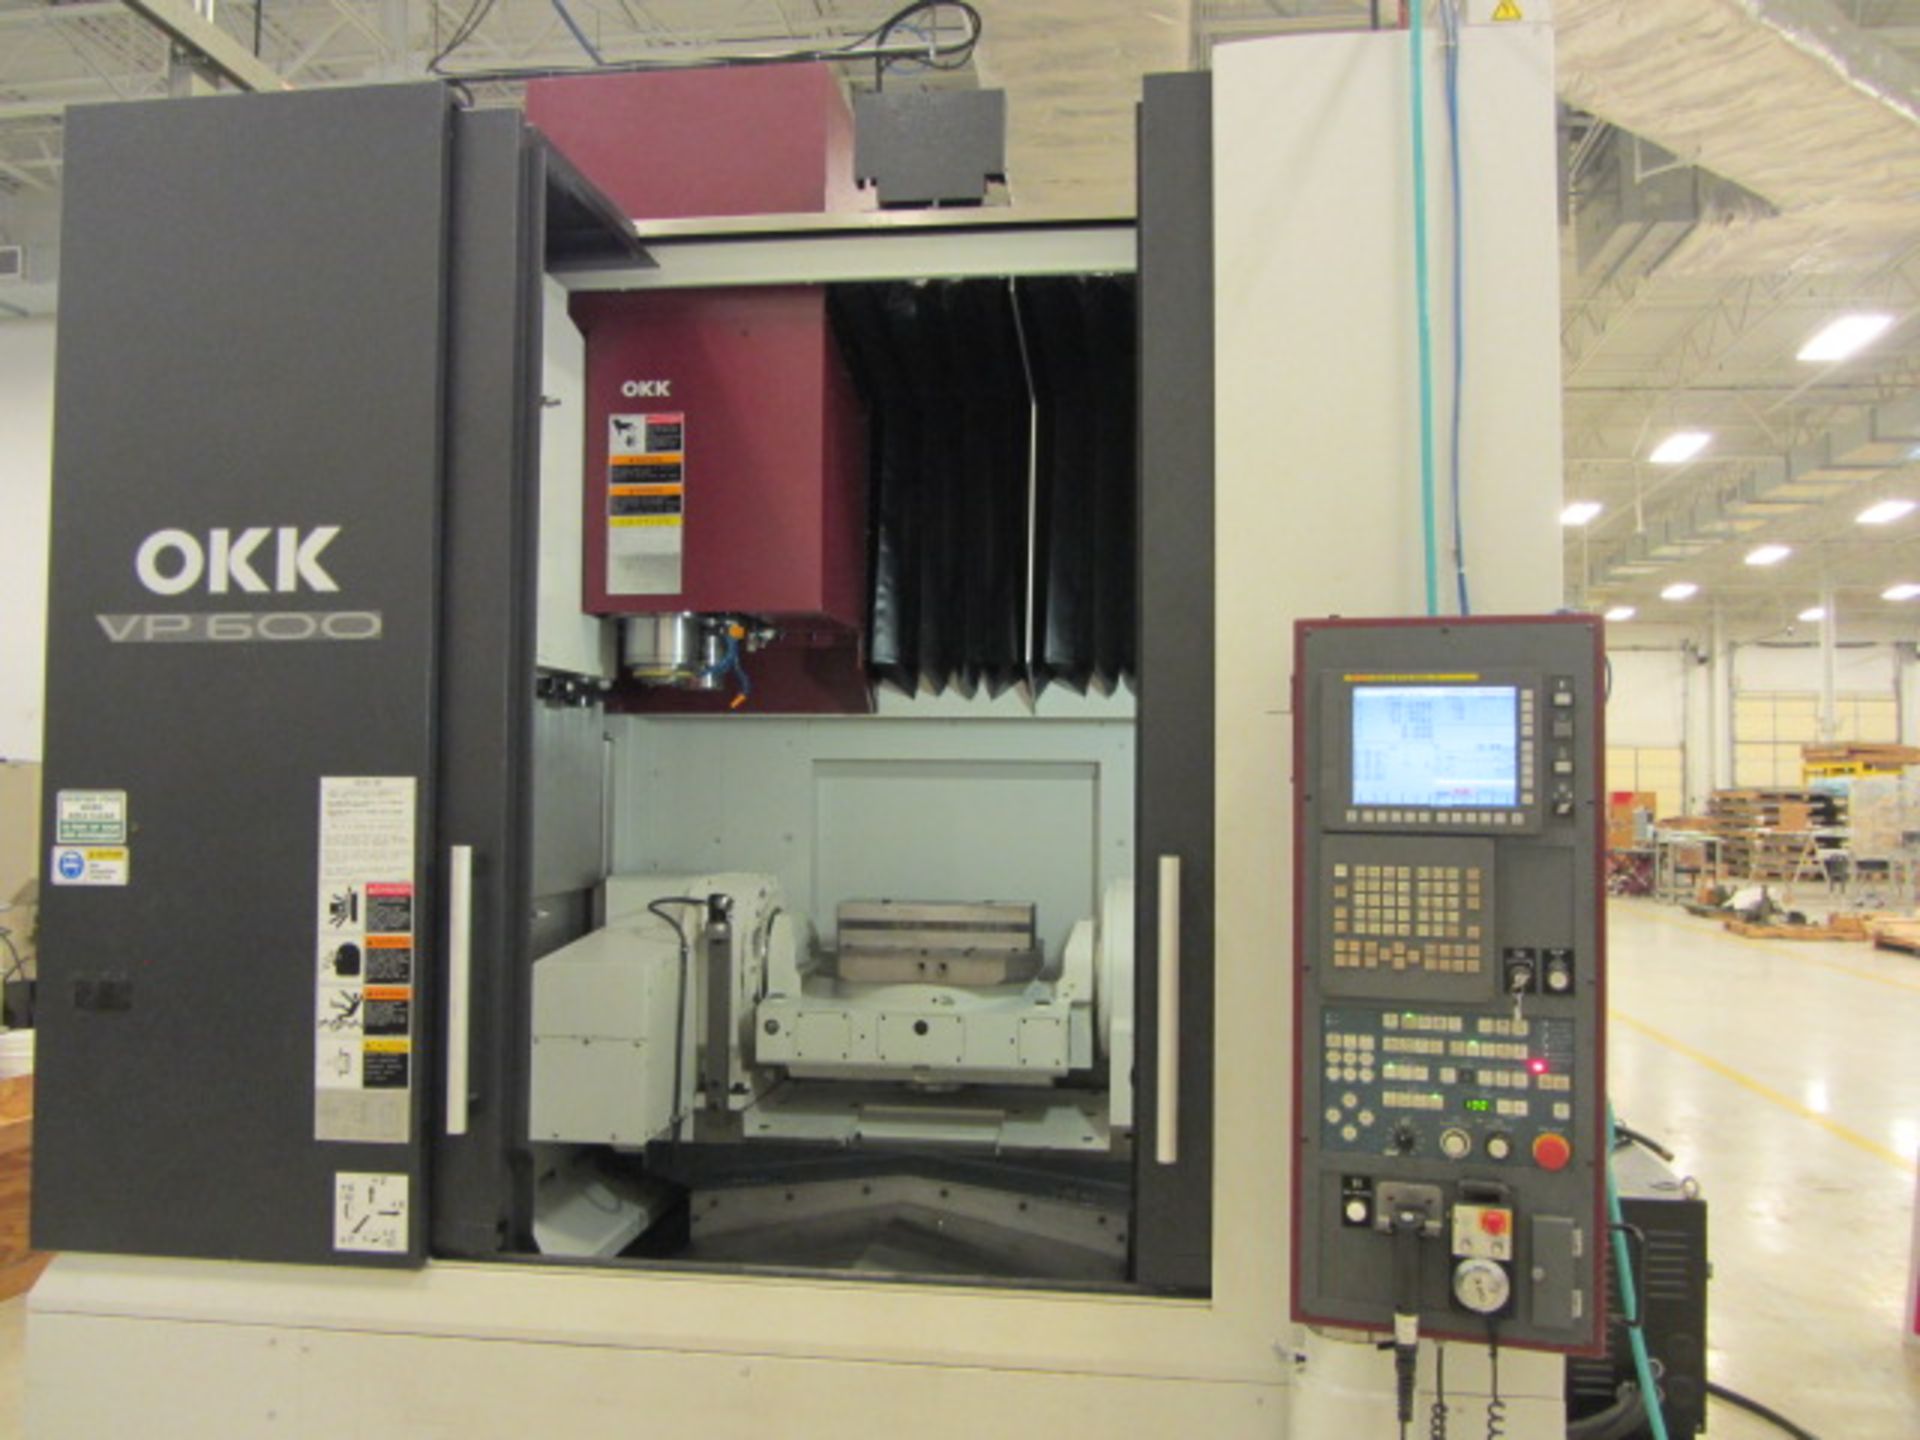 OKK VP-600 5-Axis CNC Vertical Machining Center with 19.7'' Diameter 4/5 Axis Rotary Trunnion Table, - Image 7 of 14